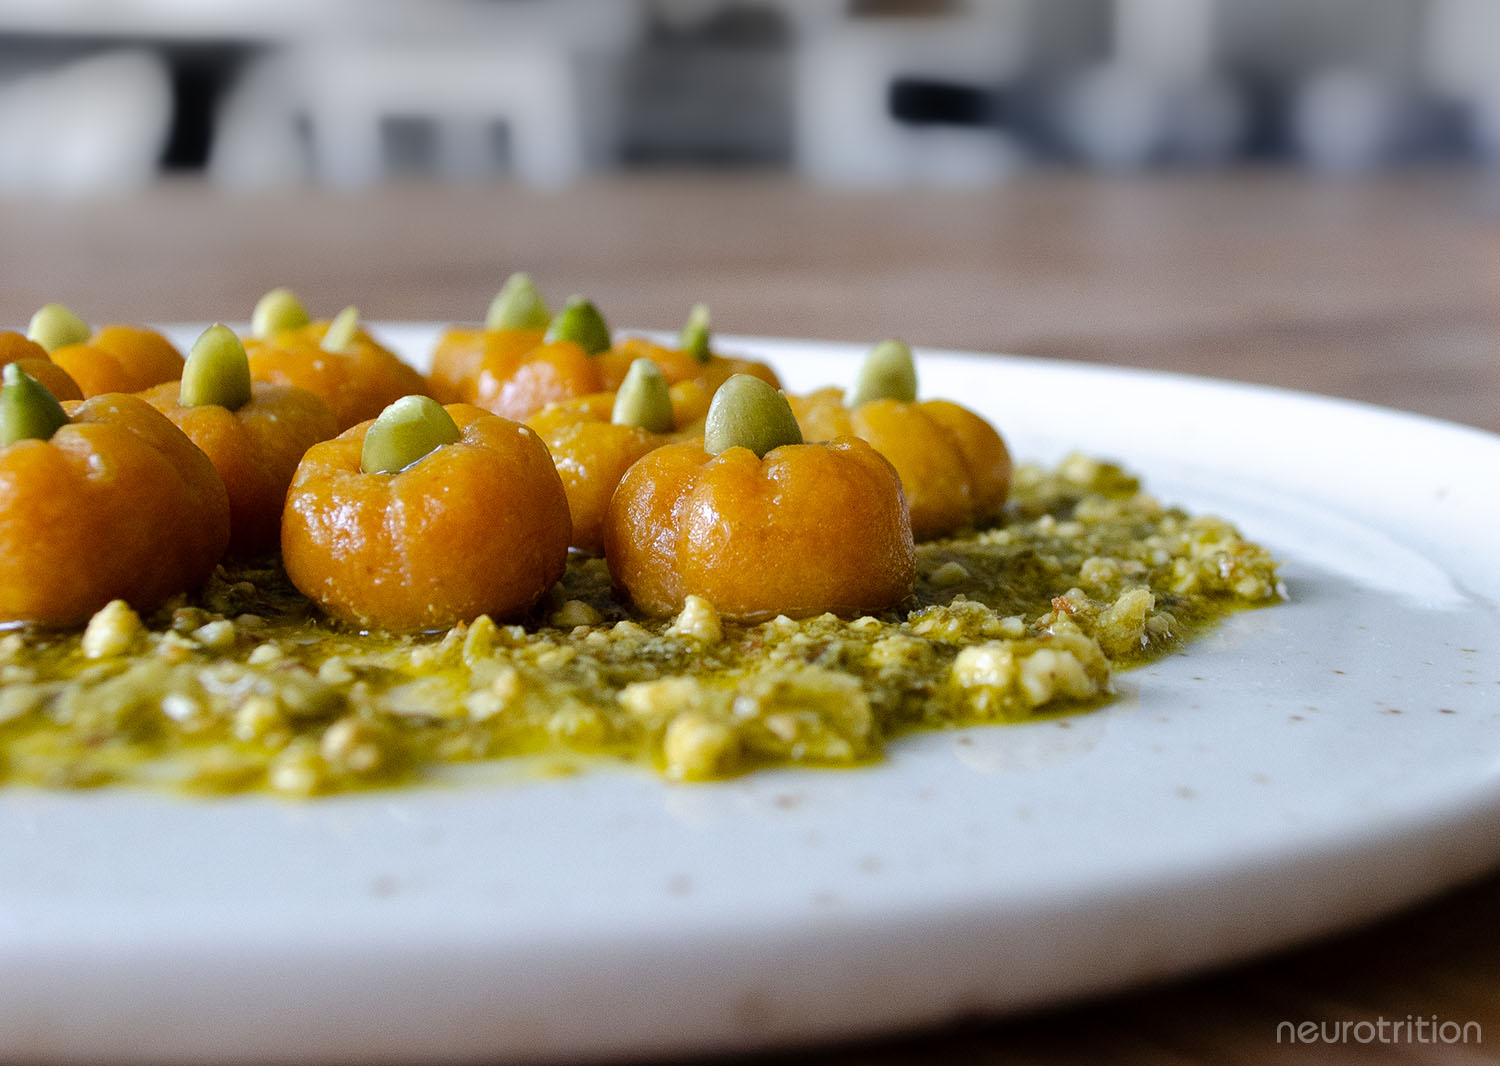 Plate of pumpkin-shaped orage pasta on a bed of pesto.